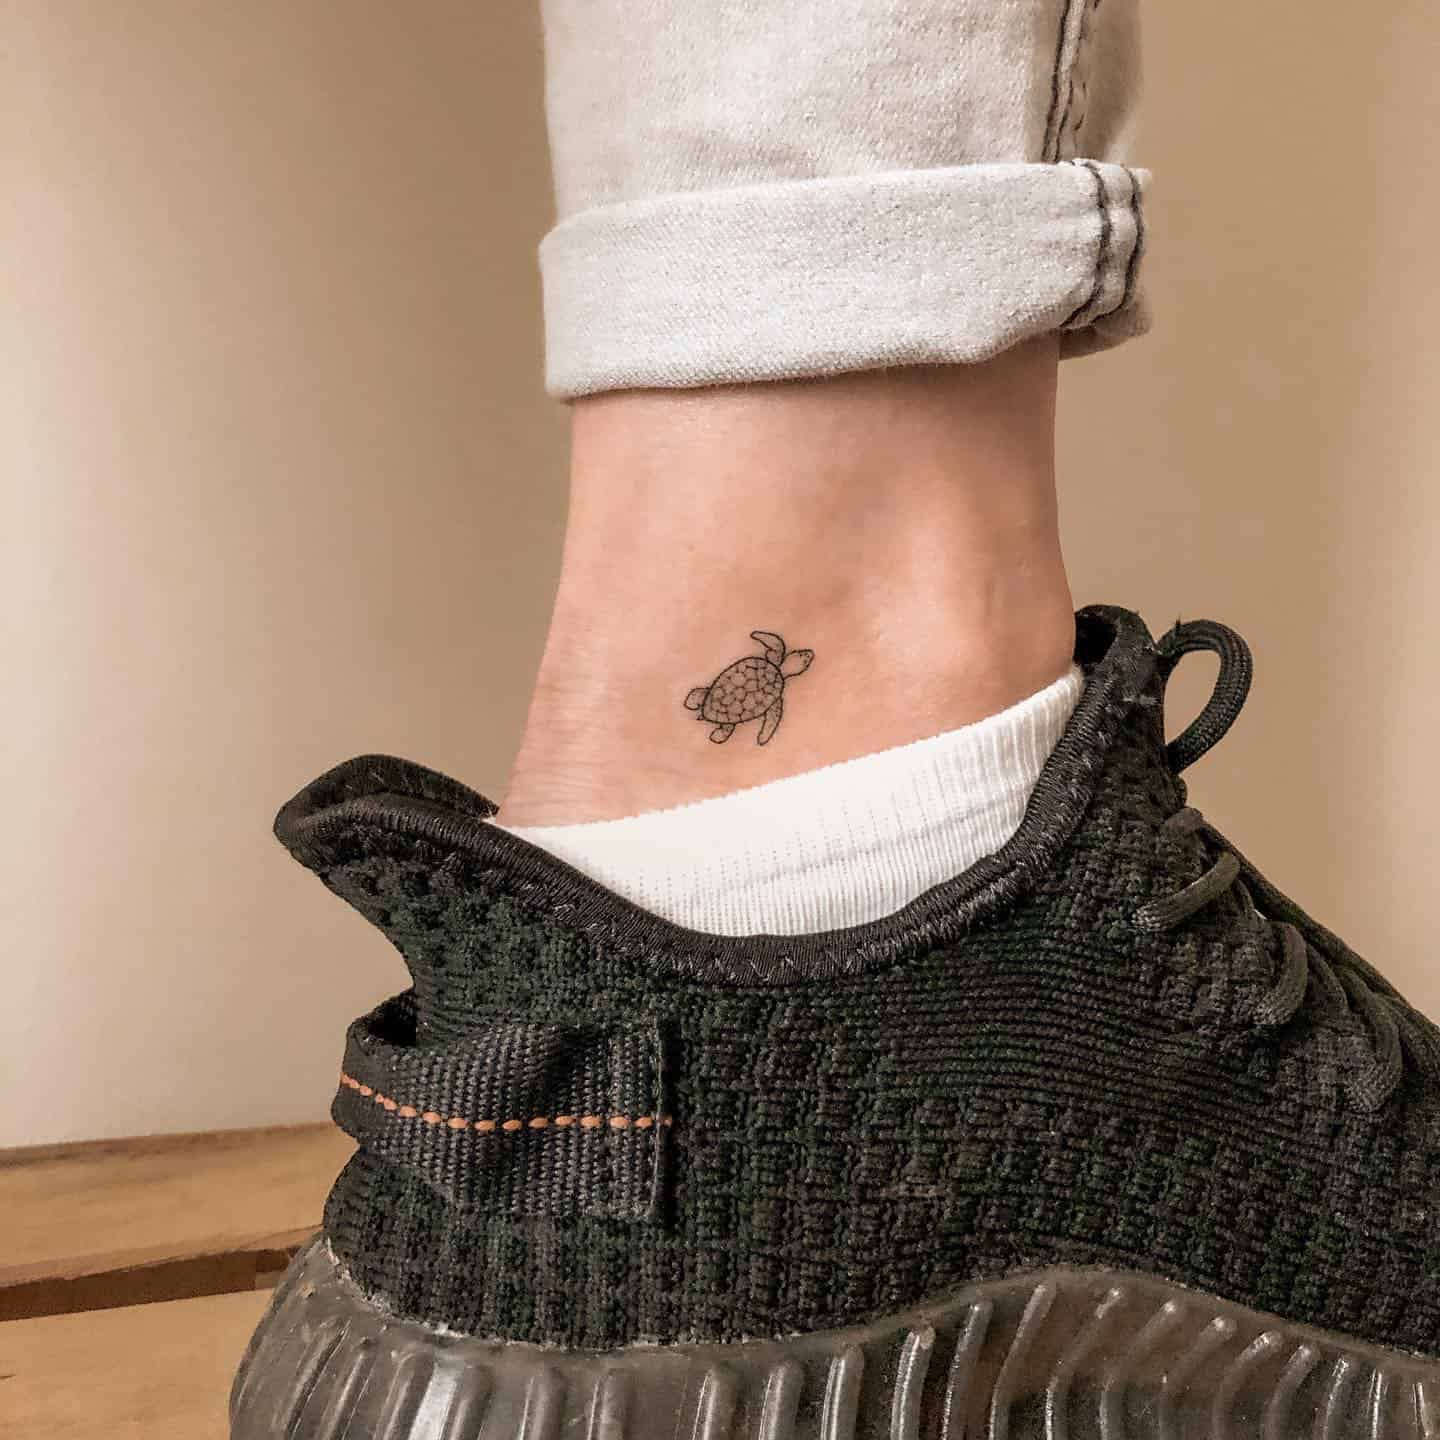 Turtle Tattoos on the ankle 3